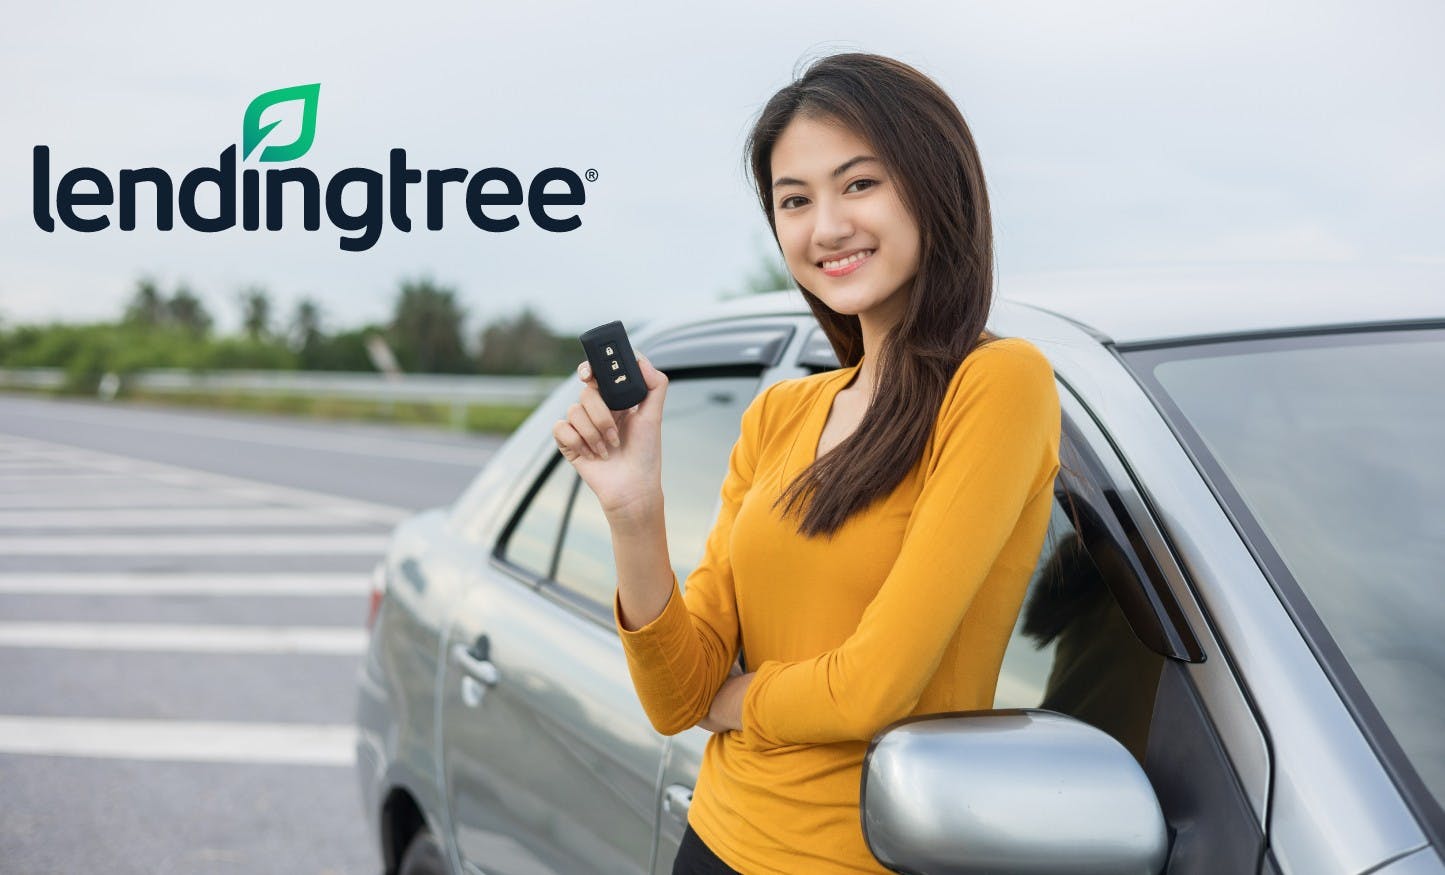 LendingTree Auto Loans Review: Features, Prices, and More!